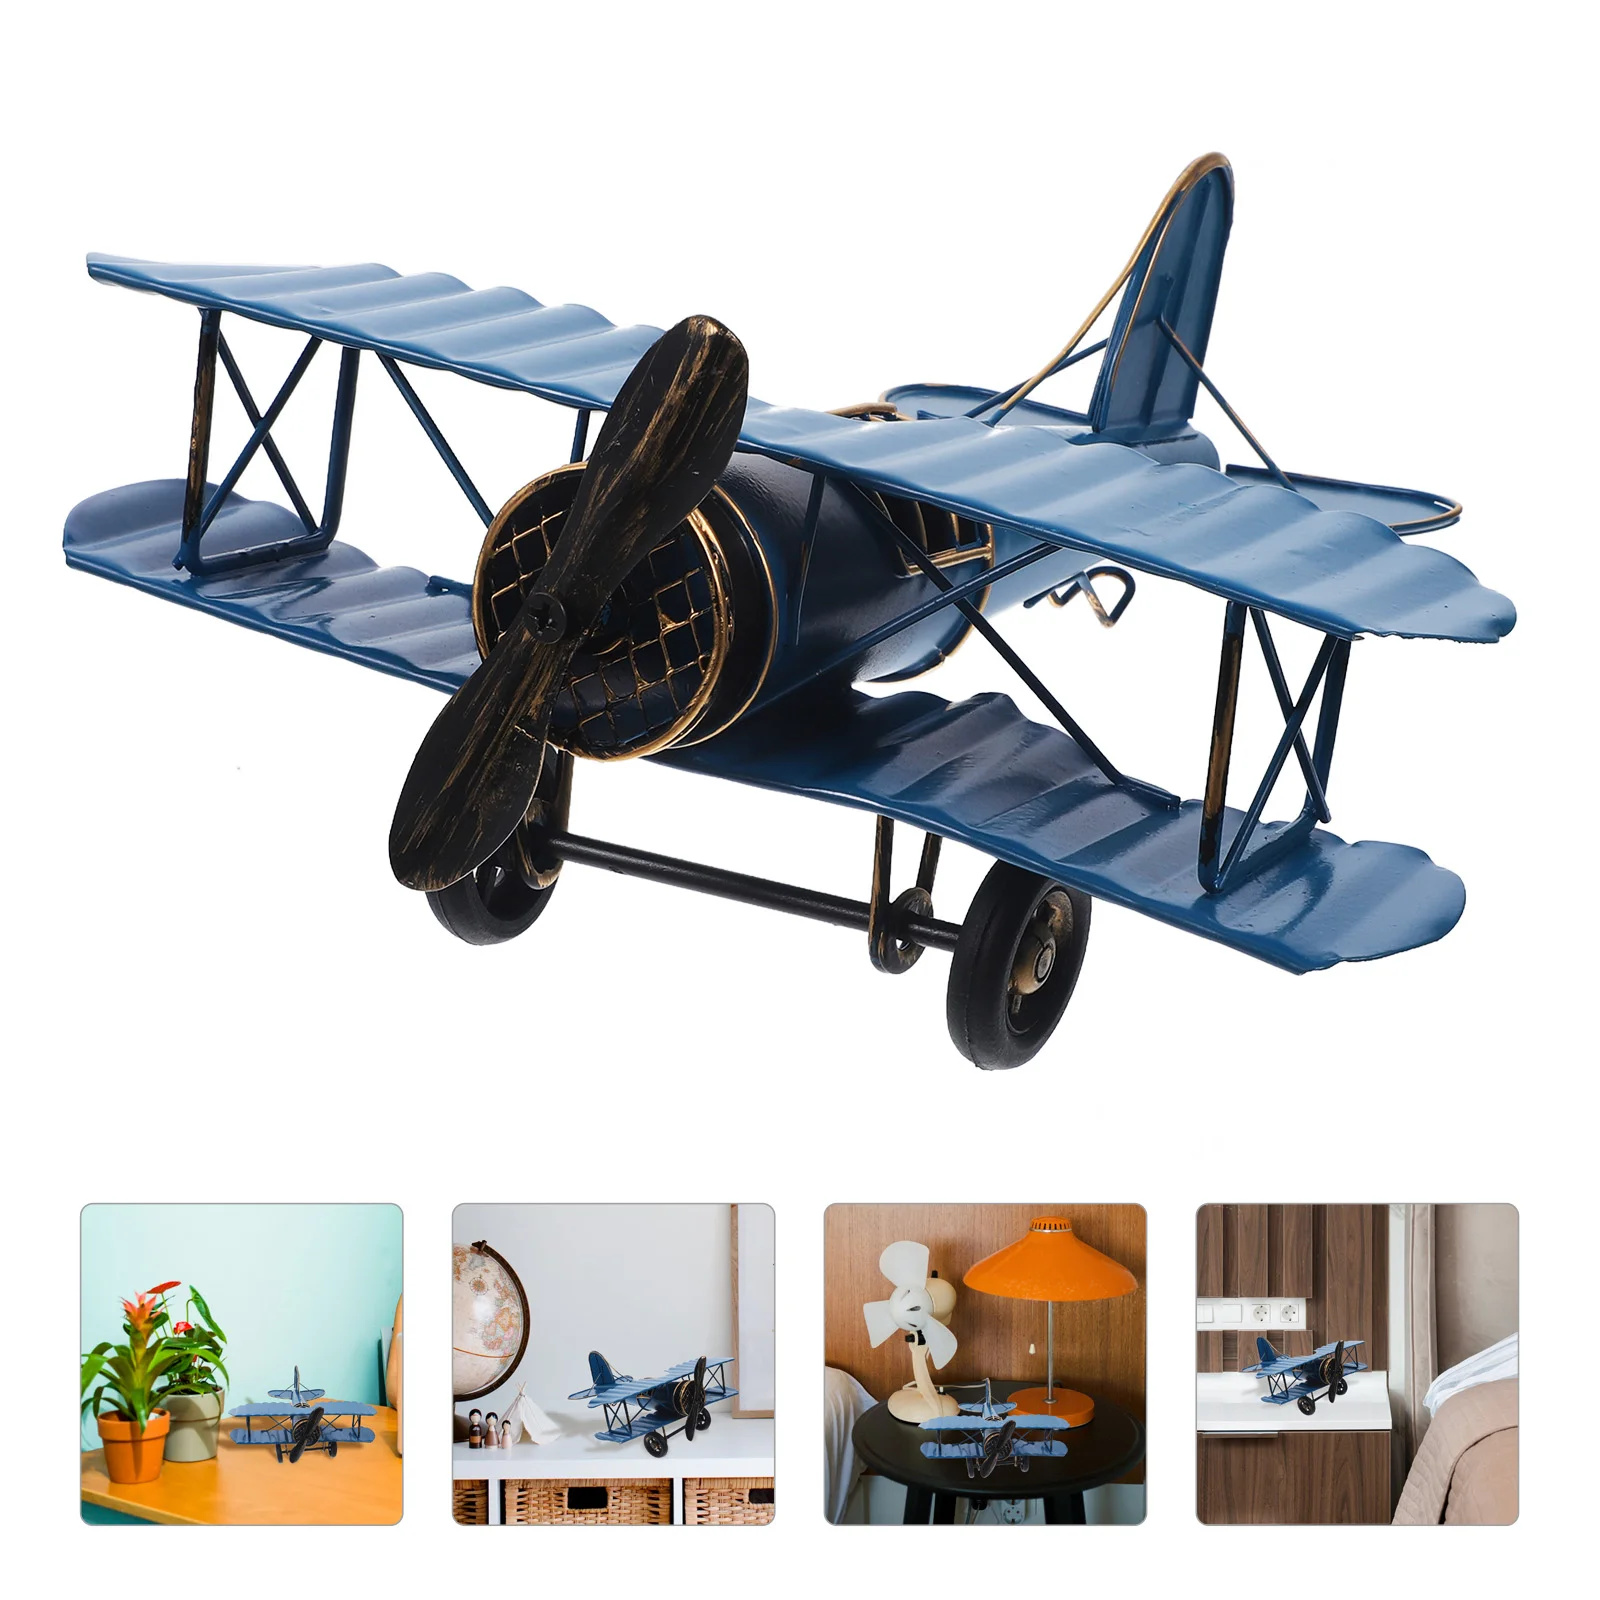 

Airplane Model Ornament Vintage Metal Retro Style Planes Decorations Adornment Ornaments Craft Home